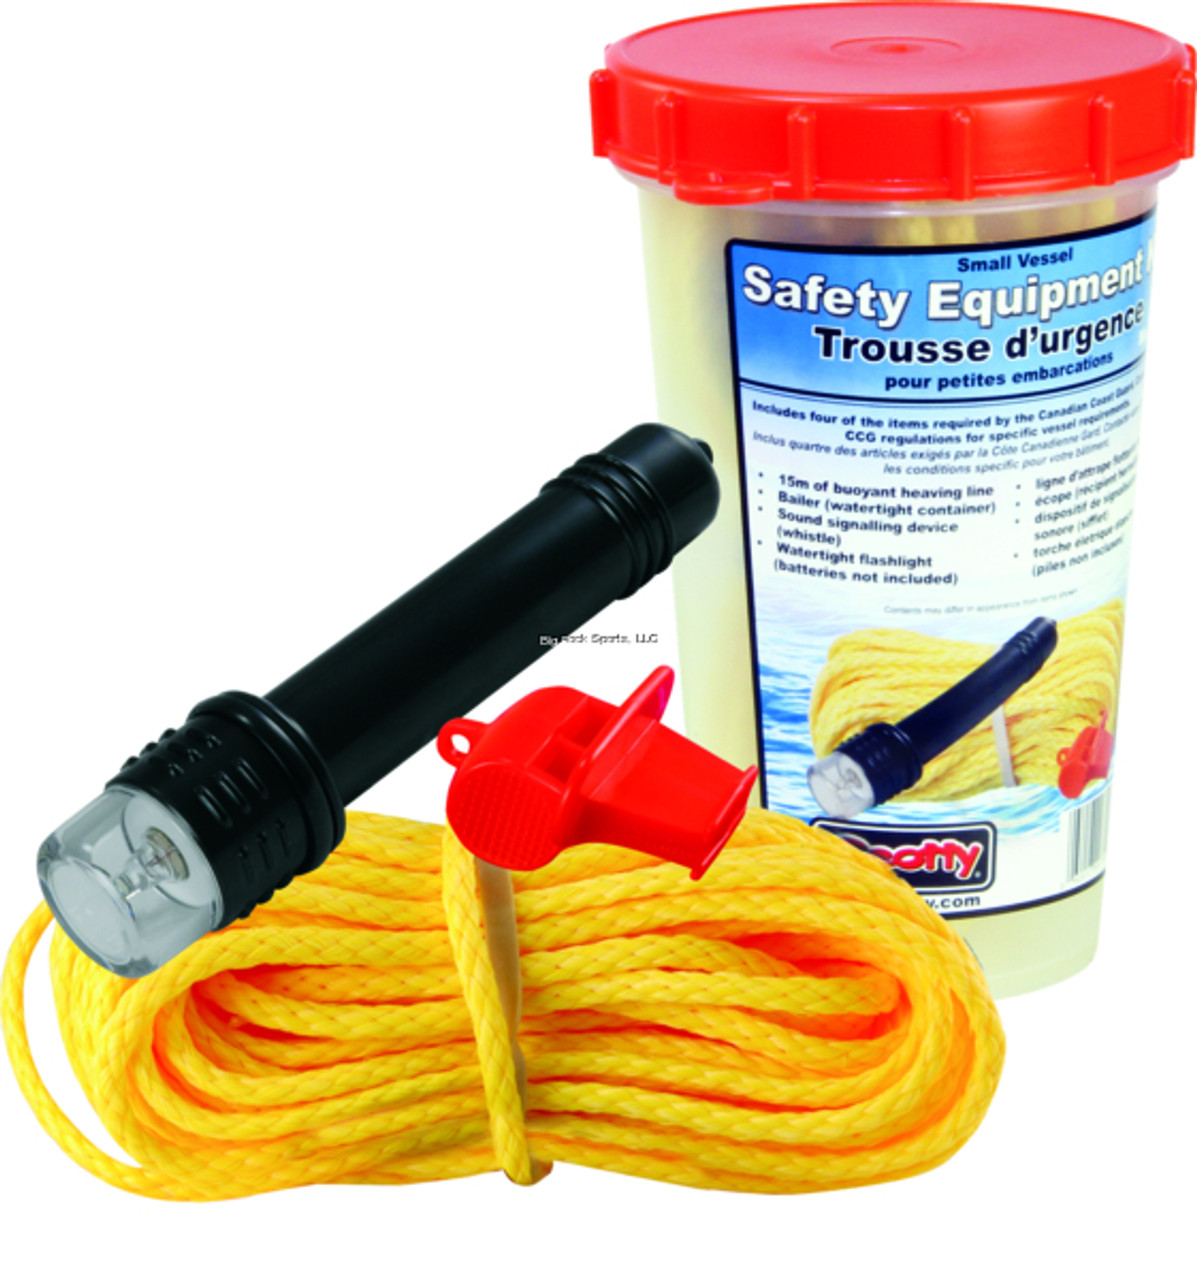 Scotty Small Vessel Safety Equipment Kit